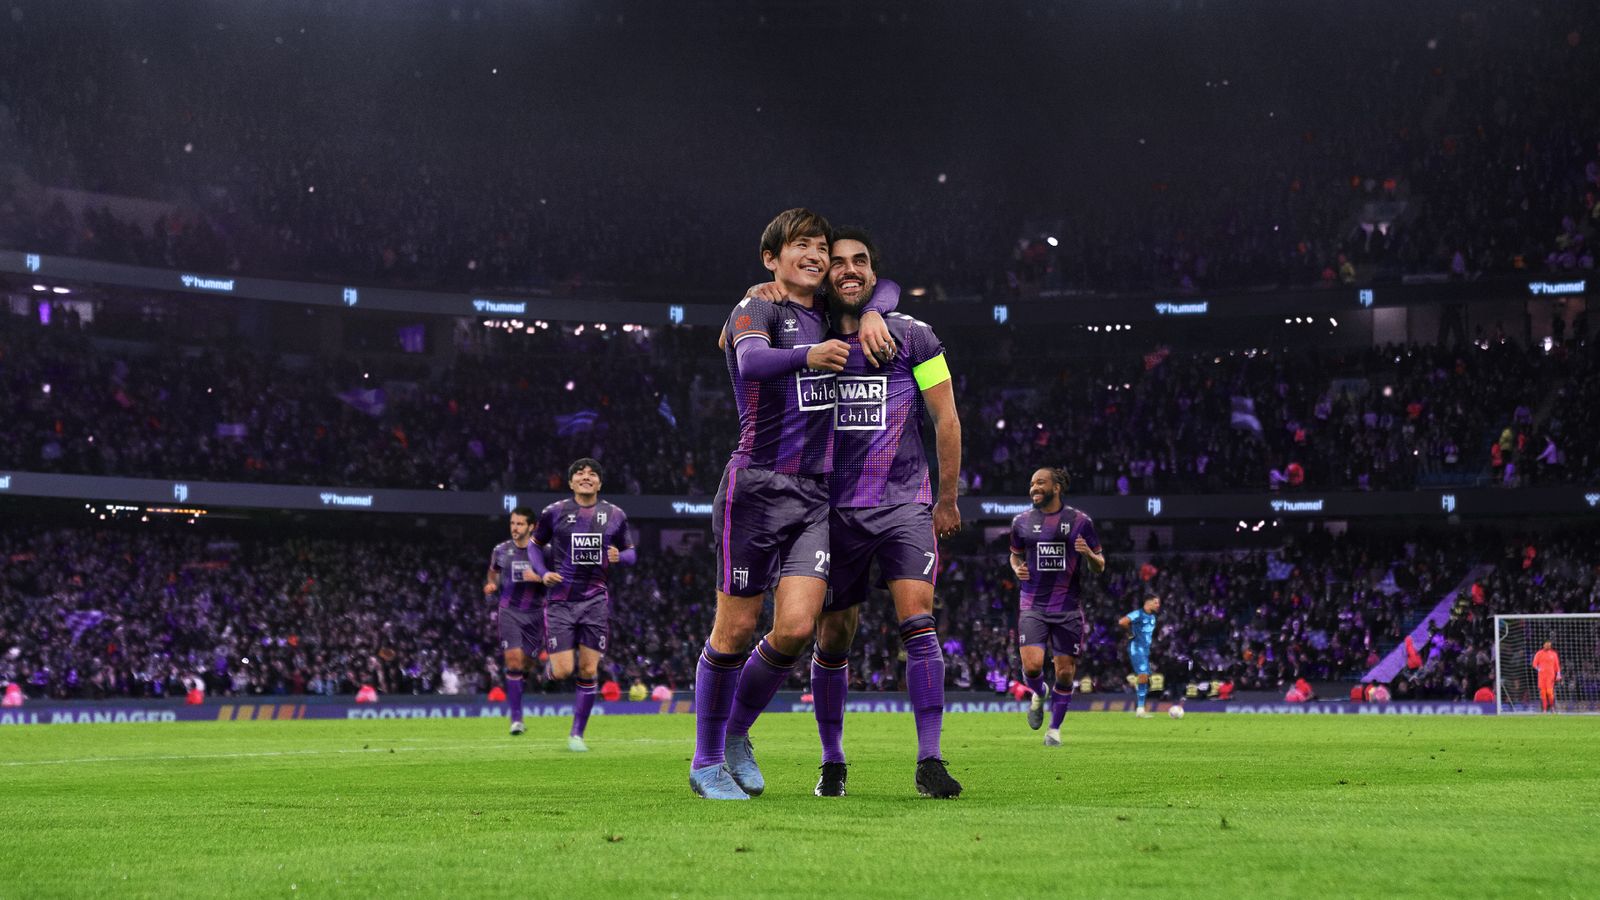 Two football players celebrating in purple kits in the middle of a stadium.